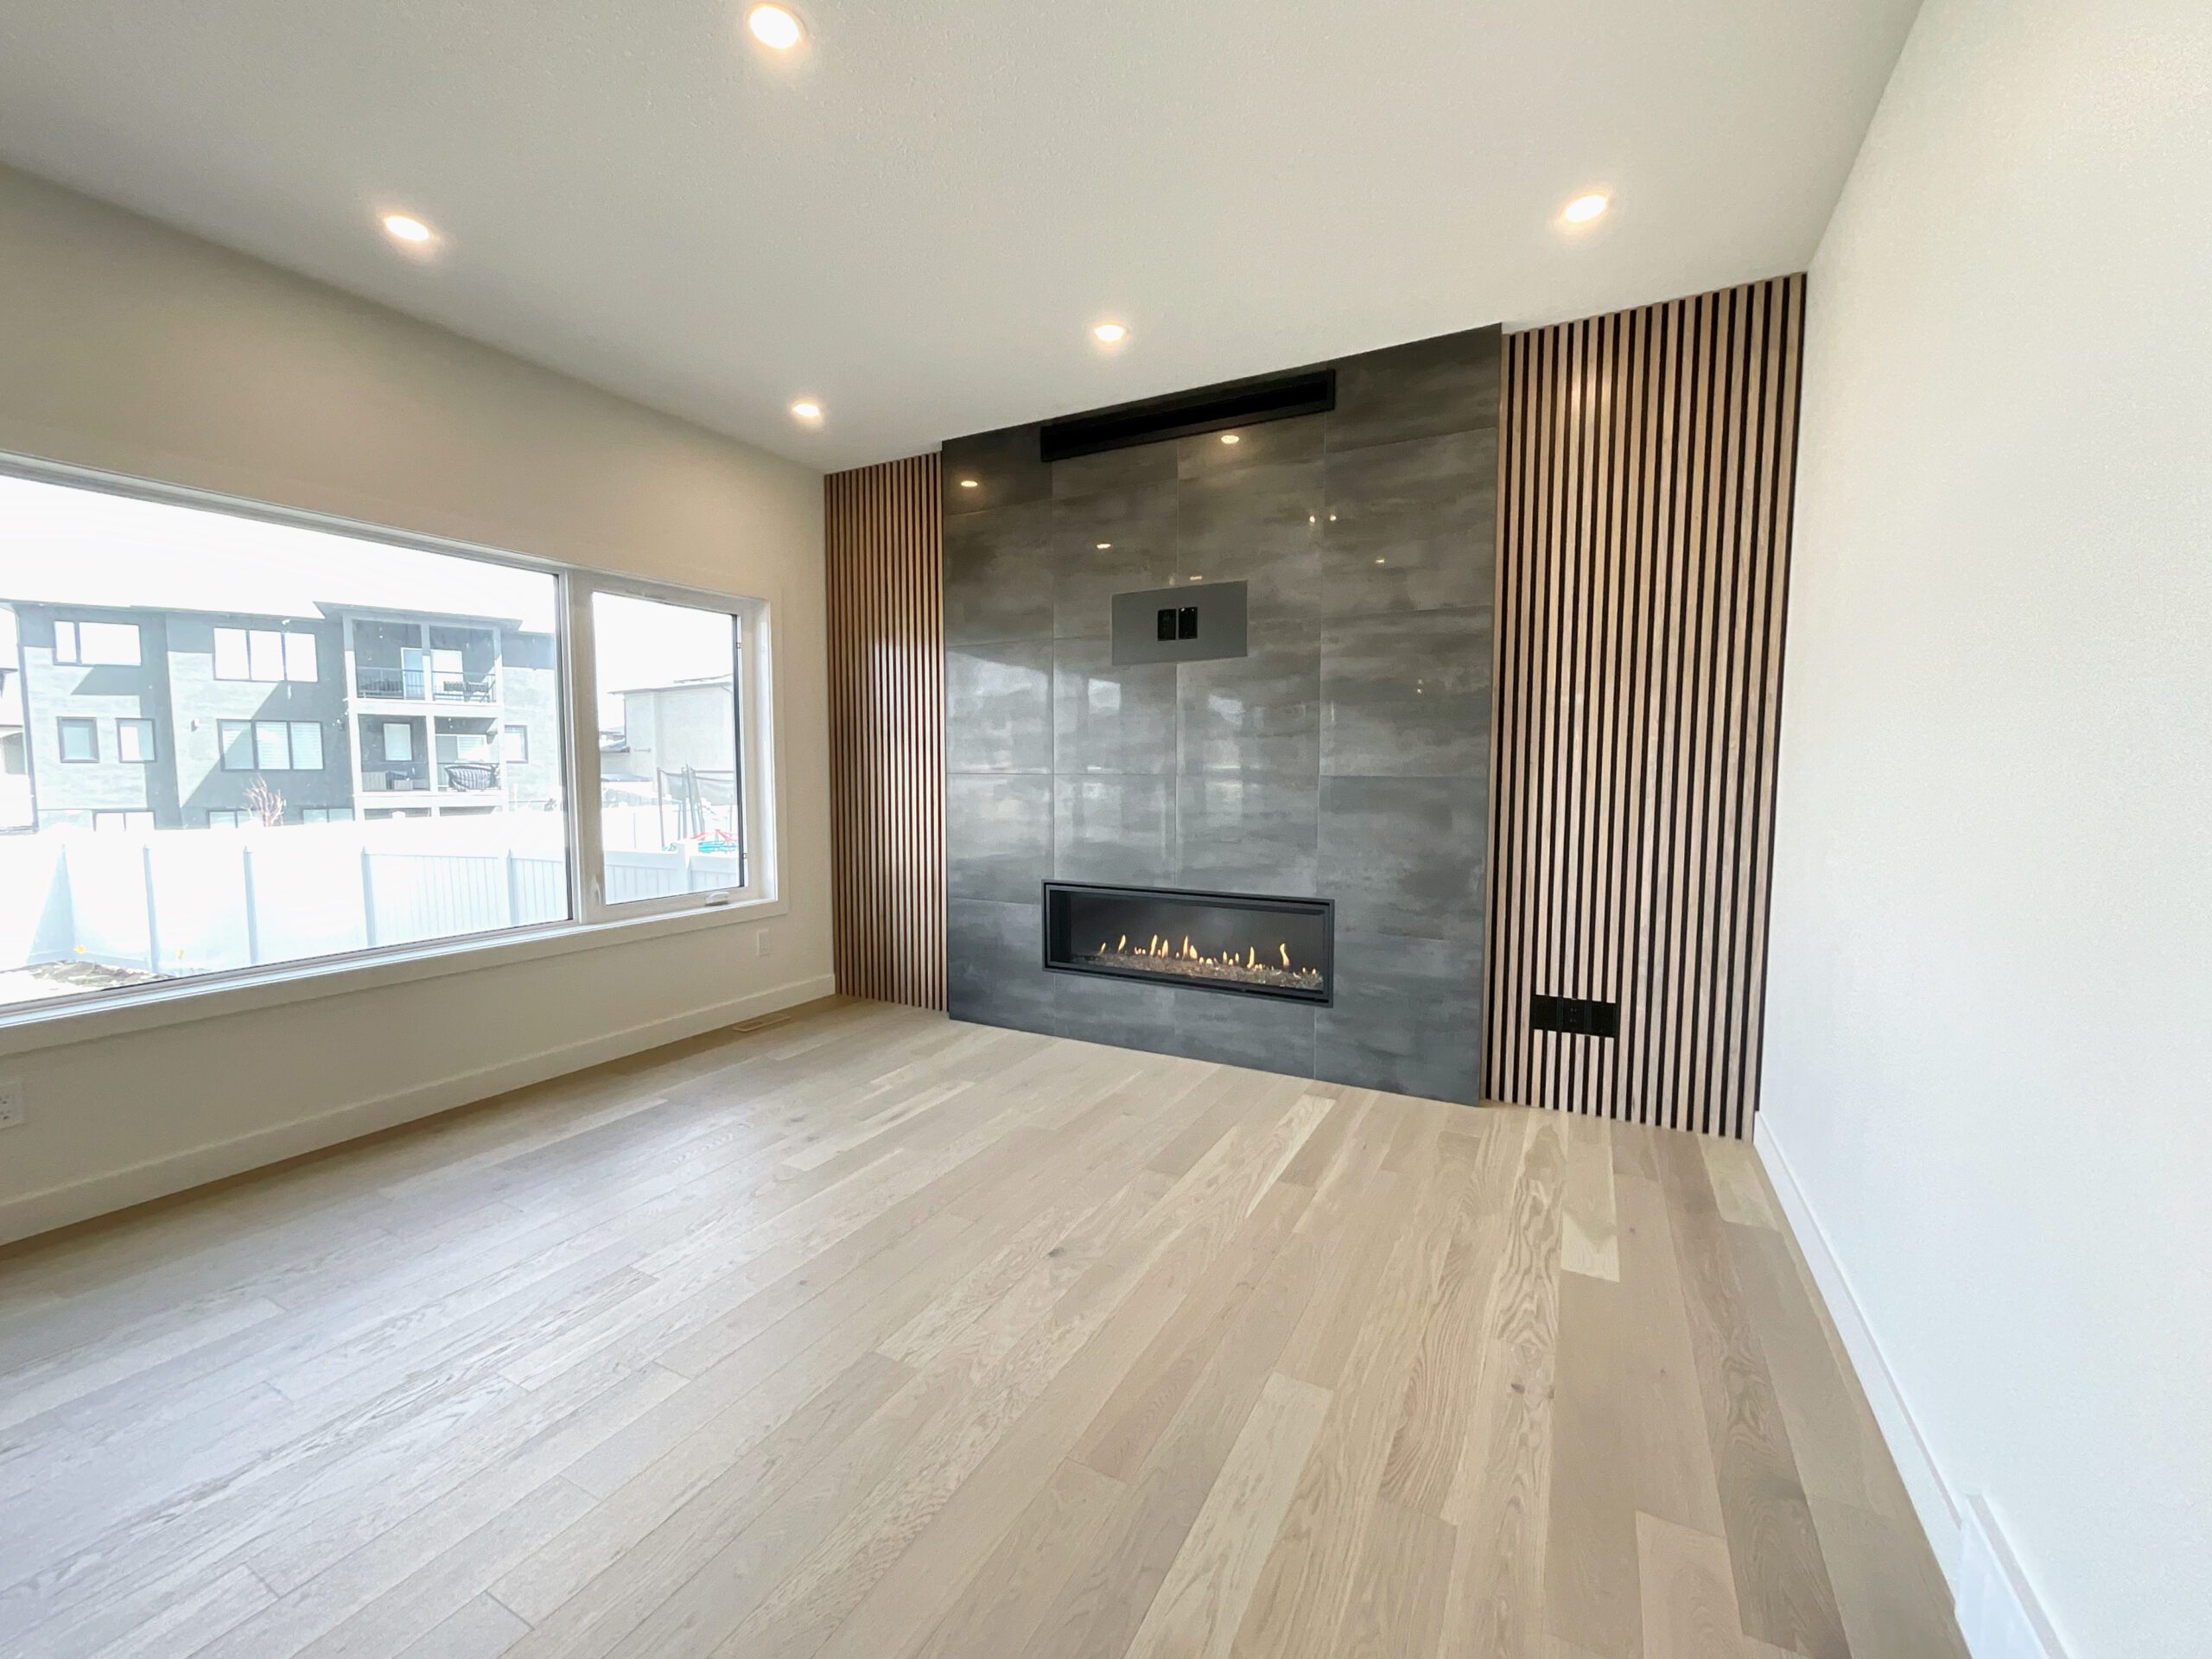 A large empty living room with a fireplace in it.